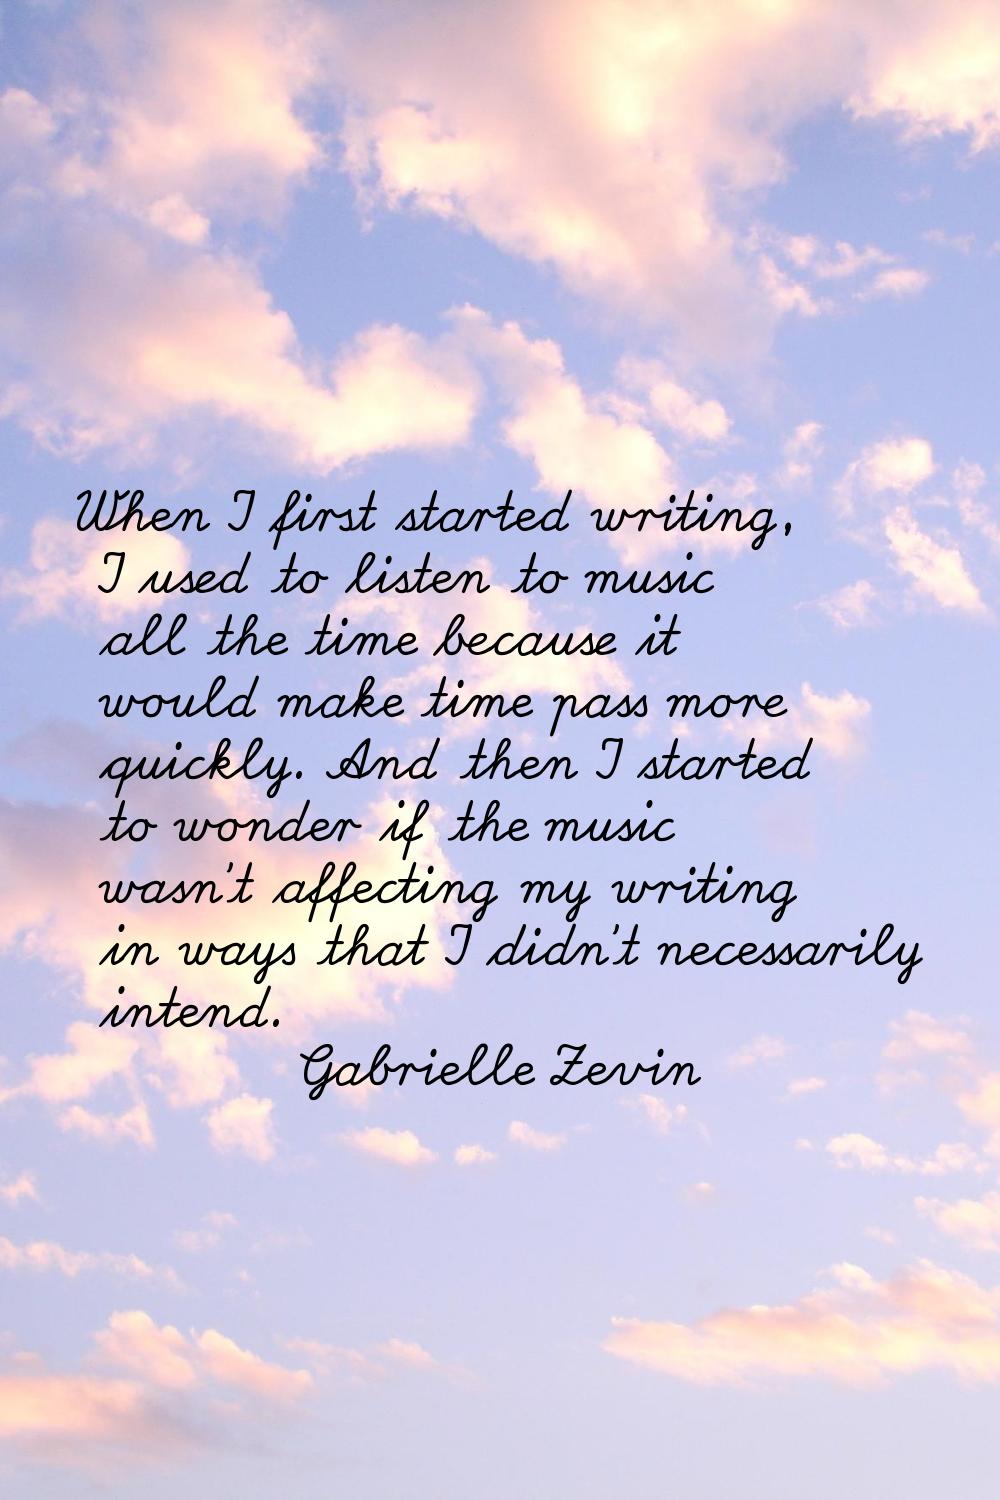 When I first started writing, I used to listen to music all the time because it would make time pas